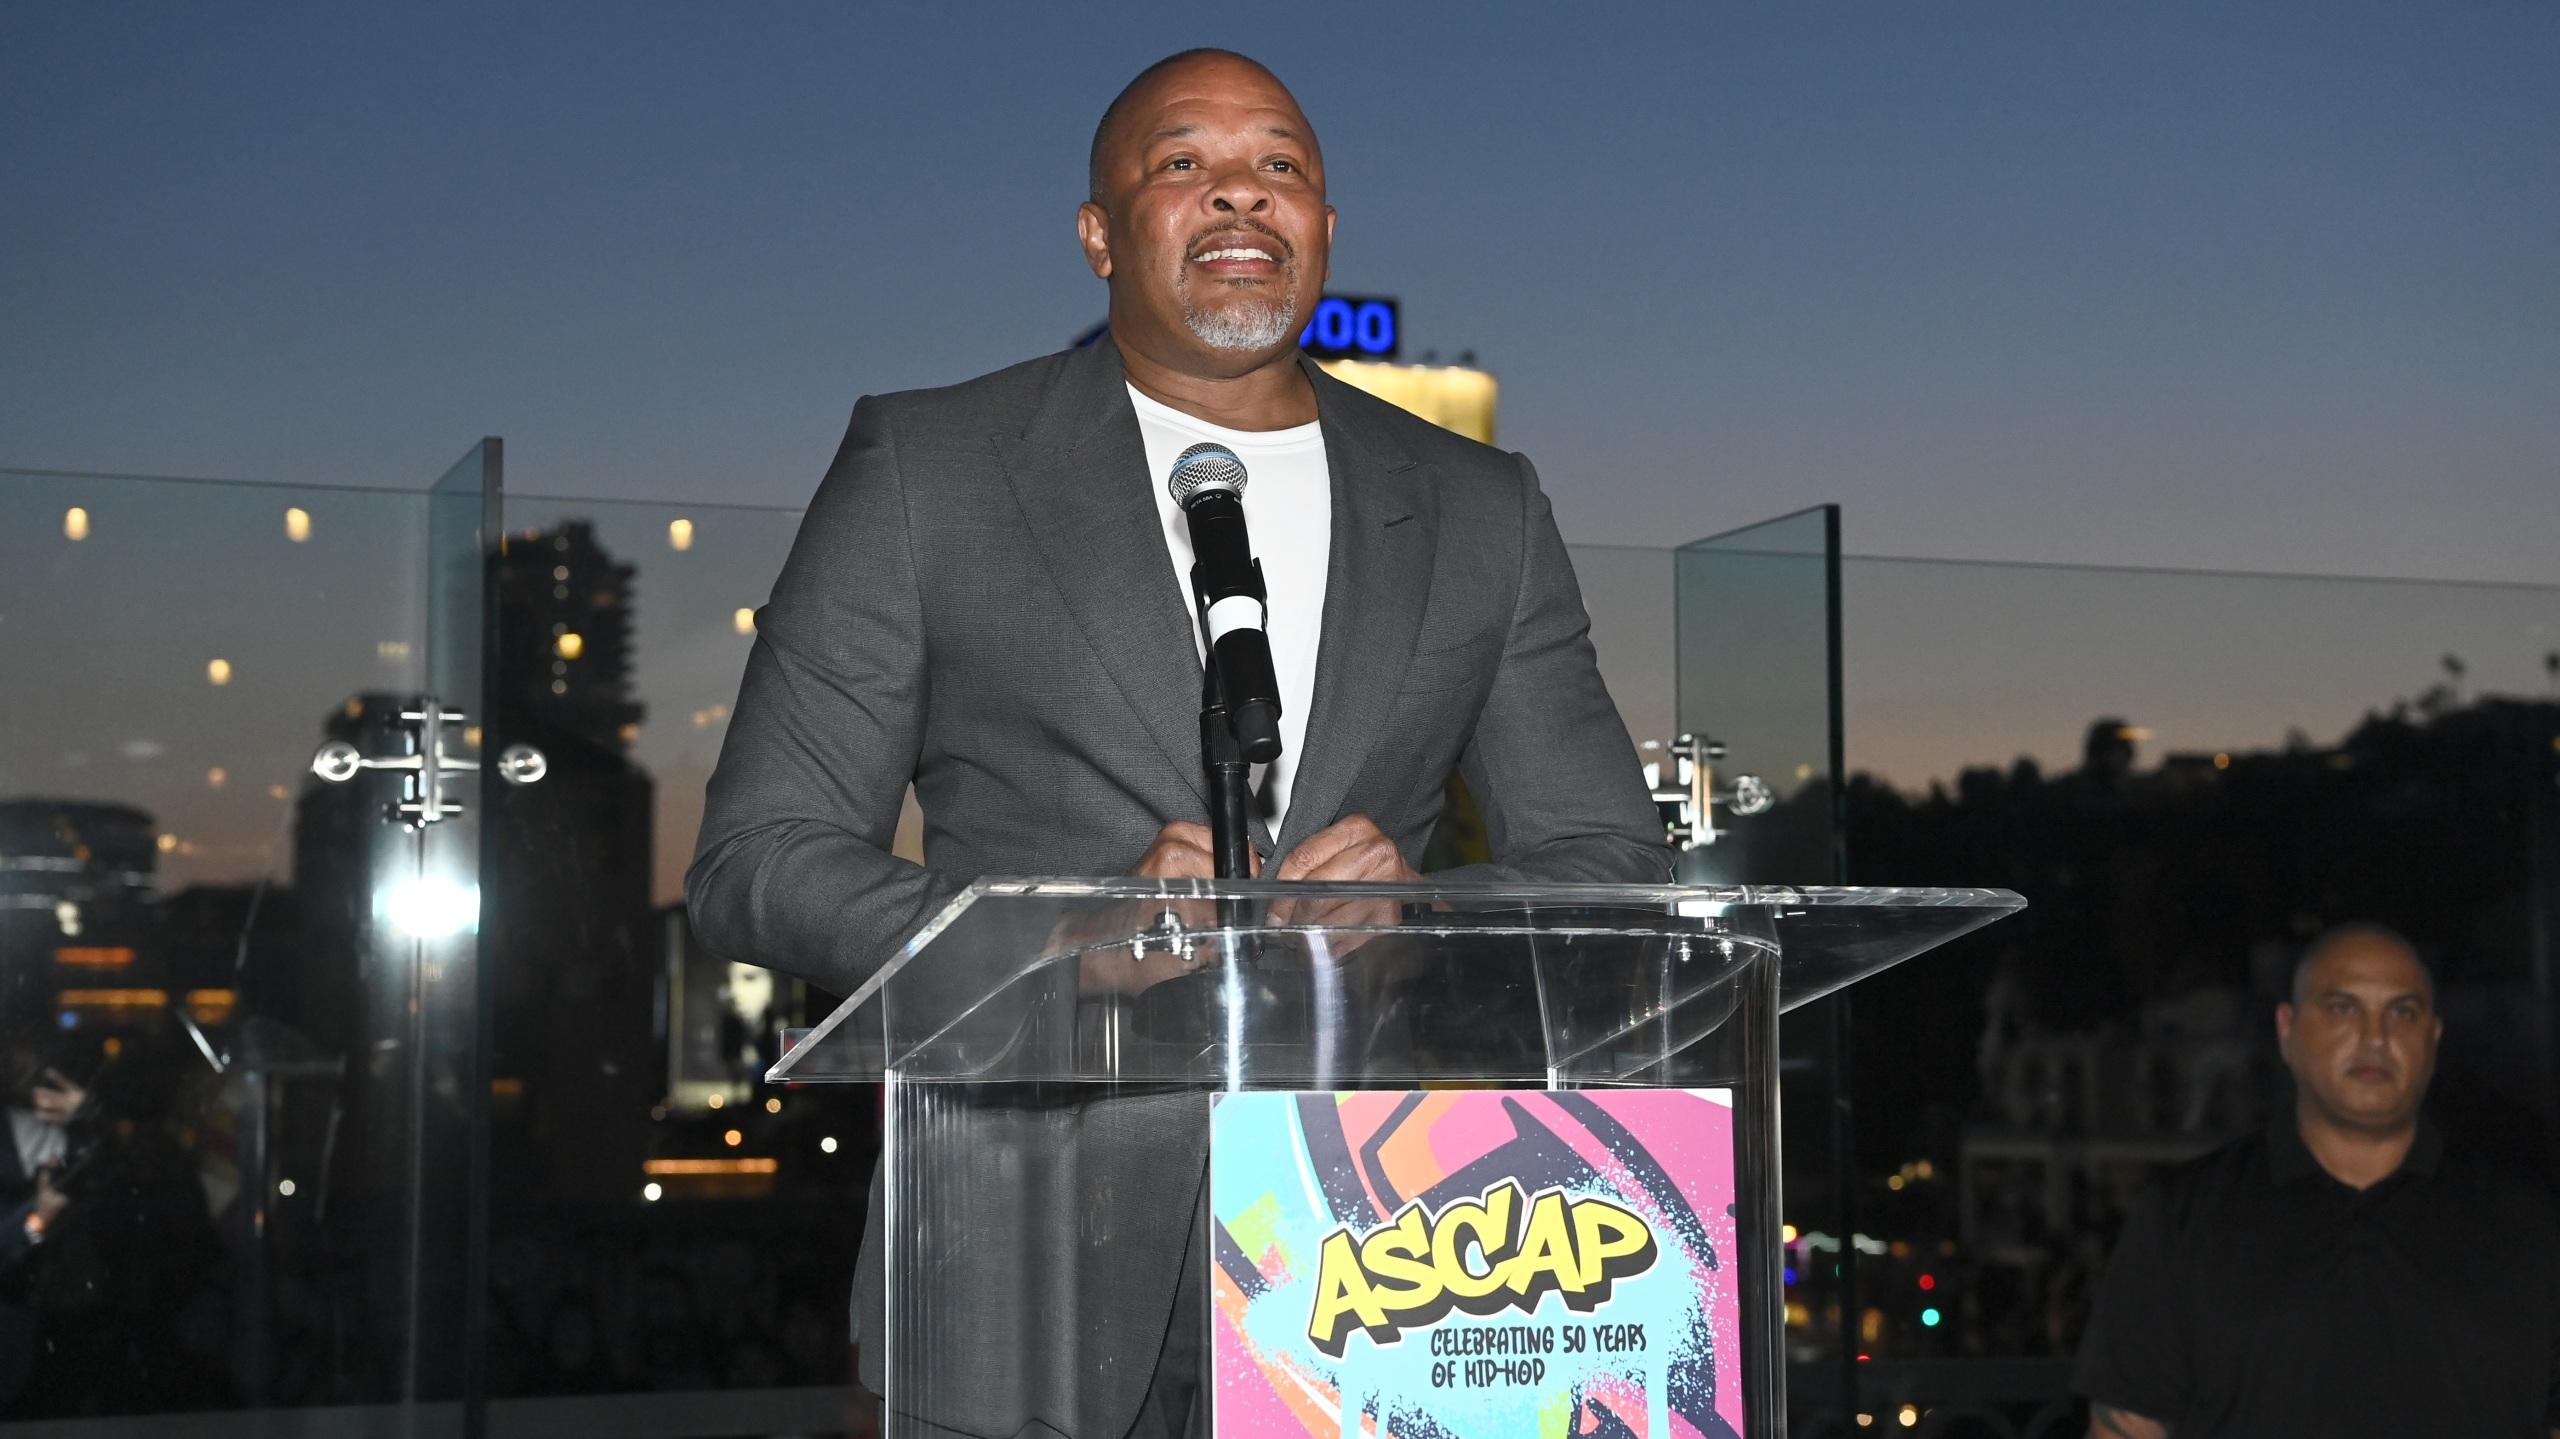 Dr Dre Bees First Ever Artist To Receive New Ascap Award I